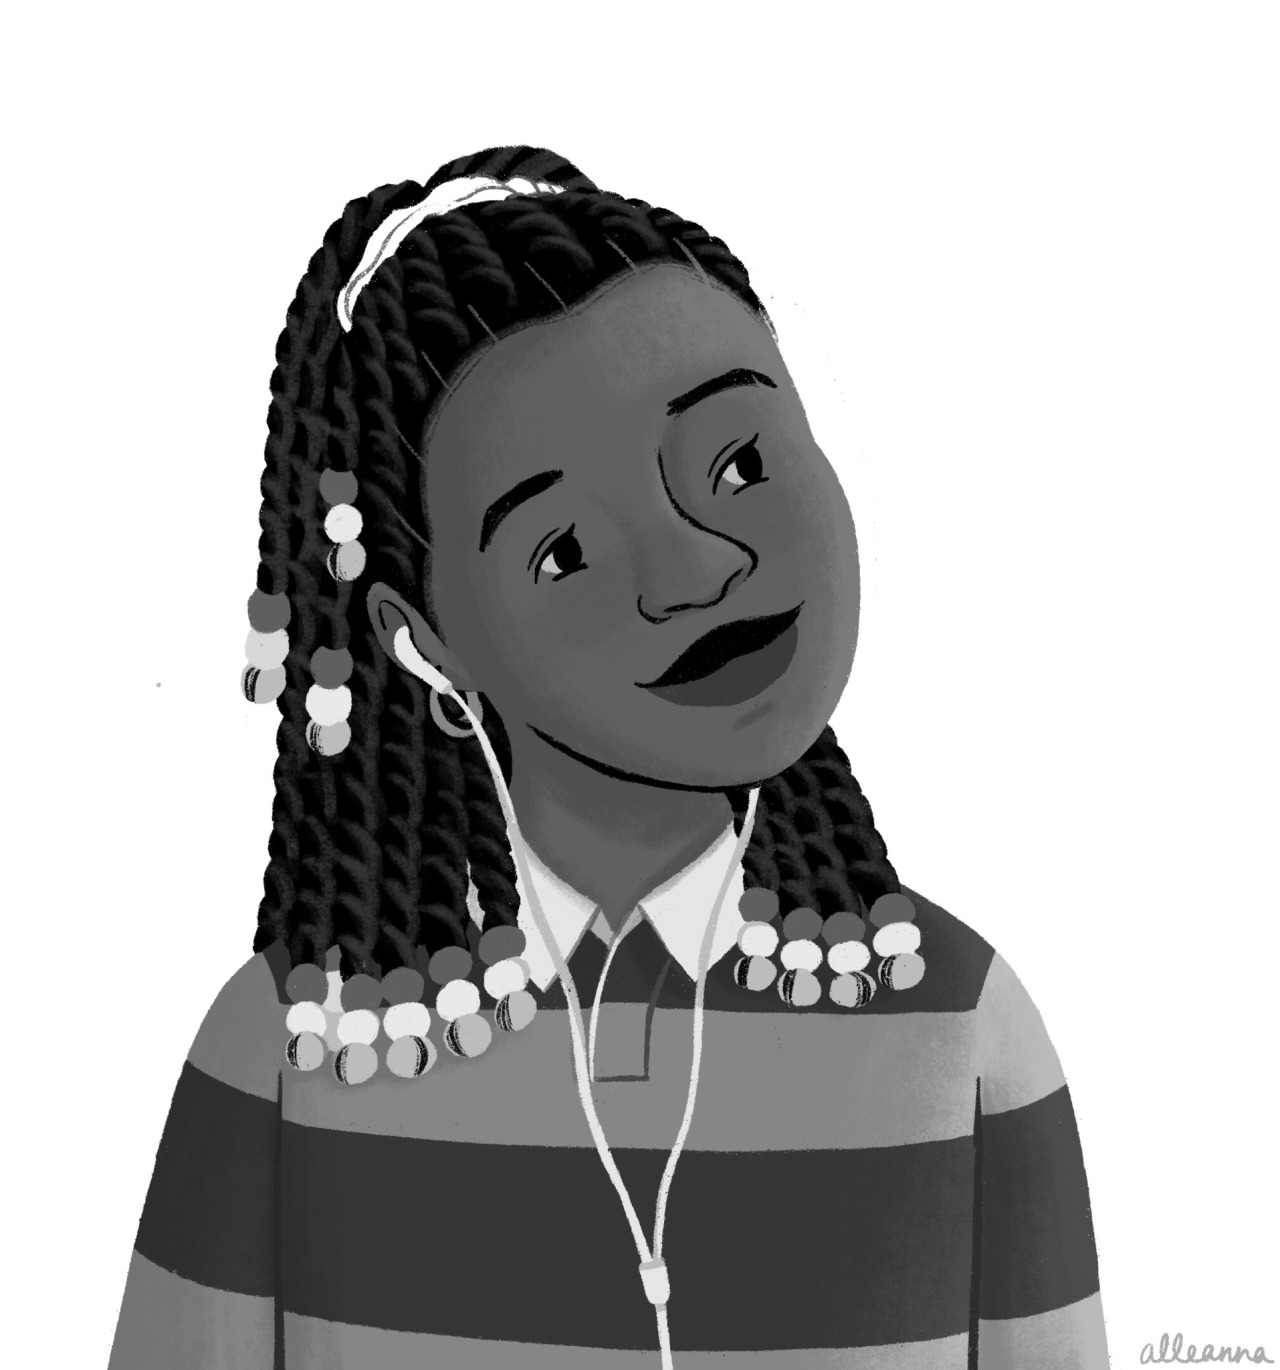 A Black girl listens to music in her earbuds while dreamily looking into the distance. She is wearing twists with wooden beads at the end and a rugby shirt. Illustration by Alleanna Harris.